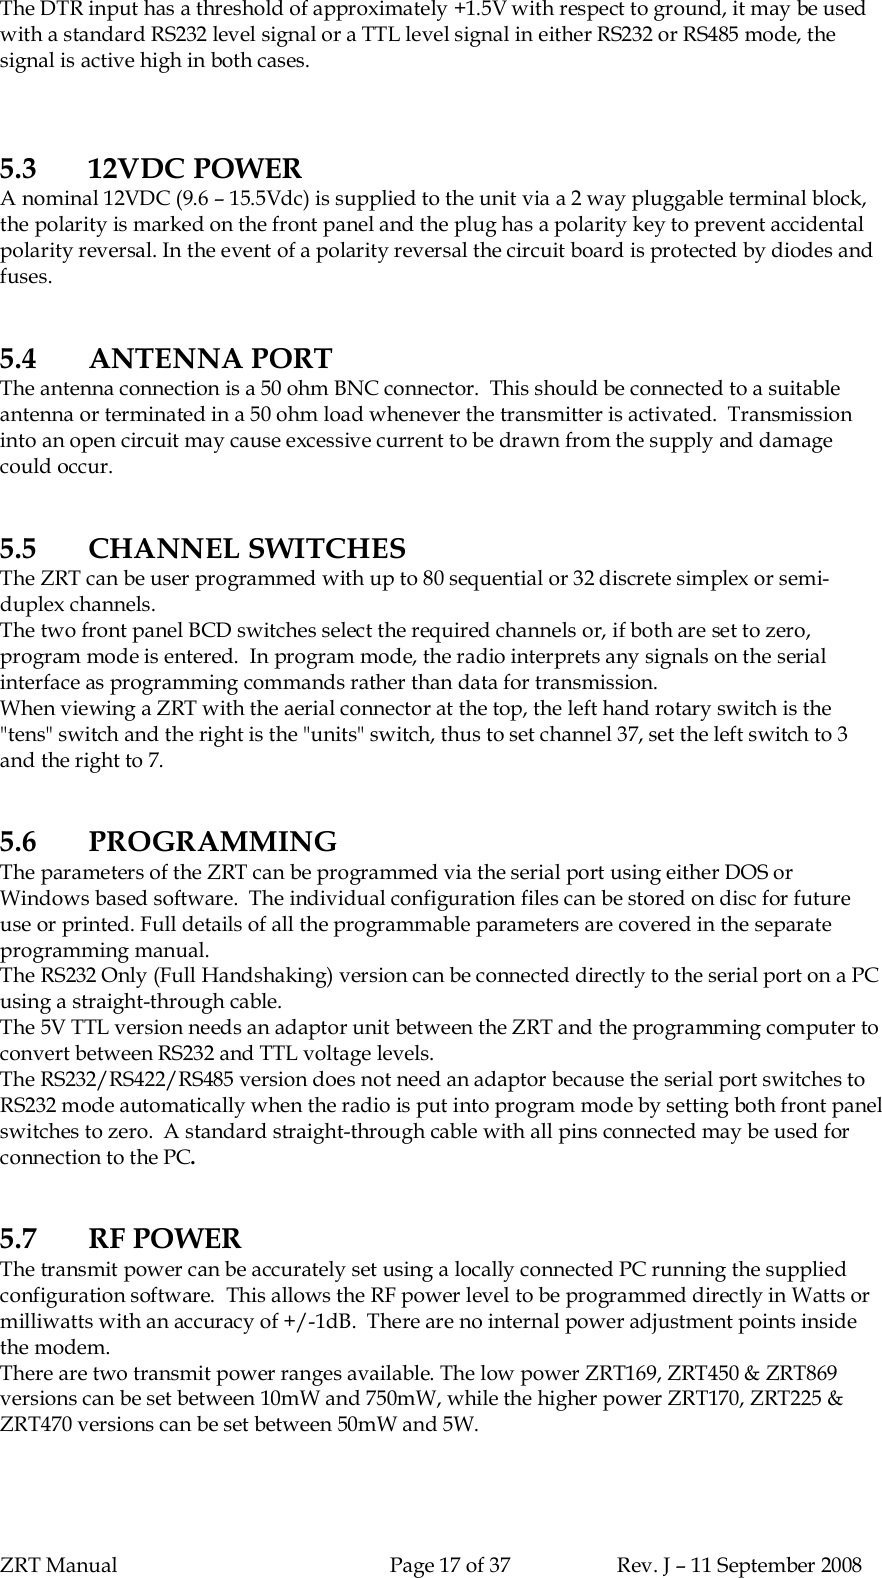 ZRT Manual Page 17 of 37 Rev. J – 11 September 2008The DTR input has a threshold of approximately +1.5V with respect to ground, it may be usedwith a standard RS232 level signal or a TTL level signal in either RS232 or RS485 mode, thesignal is active high in both cases.5.3 12VDC POWERA nominal 12VDC (9.6 – 15.5Vdc) is supplied to the unit via a 2 way pluggable terminal block,the polarity is marked on the front panel and the plug has a polarity key to prevent accidentalpolarity reversal. In the event of a polarity reversal the circuit board is protected by diodes andfuses.5.4 ANTENNA PORTThe antenna connection is a 50 ohm BNC connector.  This should be connected to a suitableantenna or terminated in a 50 ohm load whenever the transmitter is activated.  Transmissioninto an open circuit may cause excessive current to be drawn from the supply and damagecould occur.5.5 CHANNEL SWITCHESThe ZRT can be user programmed with up to 80 sequential or 32 discrete simplex or semi-duplex channels.The two front panel BCD switches select the required channels or, if both are set to zero,program mode is entered.  In program mode, the radio interprets any signals on the serialinterface as programming commands rather than data for transmission.When viewing a ZRT with the aerial connector at the top, the left hand rotary switch is the&quot;tens&quot; switch and the right is the &quot;units&quot; switch, thus to set channel 37, set the left switch to 3and the right to 7.5.6 PROGRAMMINGThe parameters of the ZRT can be programmed via the serial port using either DOS orWindows based software.  The individual configuration files can be stored on disc for futureuse or printed. Full details of all the programmable parameters are covered in the separateprogramming manual.The RS232 Only (Full Handshaking) version can be connected directly to the serial port on a PCusing a straight-through cable.The 5V TTL version needs an adaptor unit between the ZRT and the programming computer toconvert between RS232 and TTL voltage levels.The RS232/RS422/RS485 version does not need an adaptor because the serial port switches toRS232 mode automatically when the radio is put into program mode by setting both front panelswitches to zero.  A standard straight-through cable with all pins connected may be used forconnection to the PC.5.7 RF POWERThe transmit power can be accurately set using a locally connected PC running the suppliedconfiguration software.  This allows the RF power level to be programmed directly in Watts ormilliwatts with an accuracy of +/-1dB.  There are no internal power adjustment points insidethe modem.There are two transmit power ranges available. The low power ZRT169, ZRT450 &amp; ZRT869versions can be set between 10mW and 750mW, while the higher power ZRT170, ZRT225 &amp;ZRT470 versions can be set between 50mW and 5W.